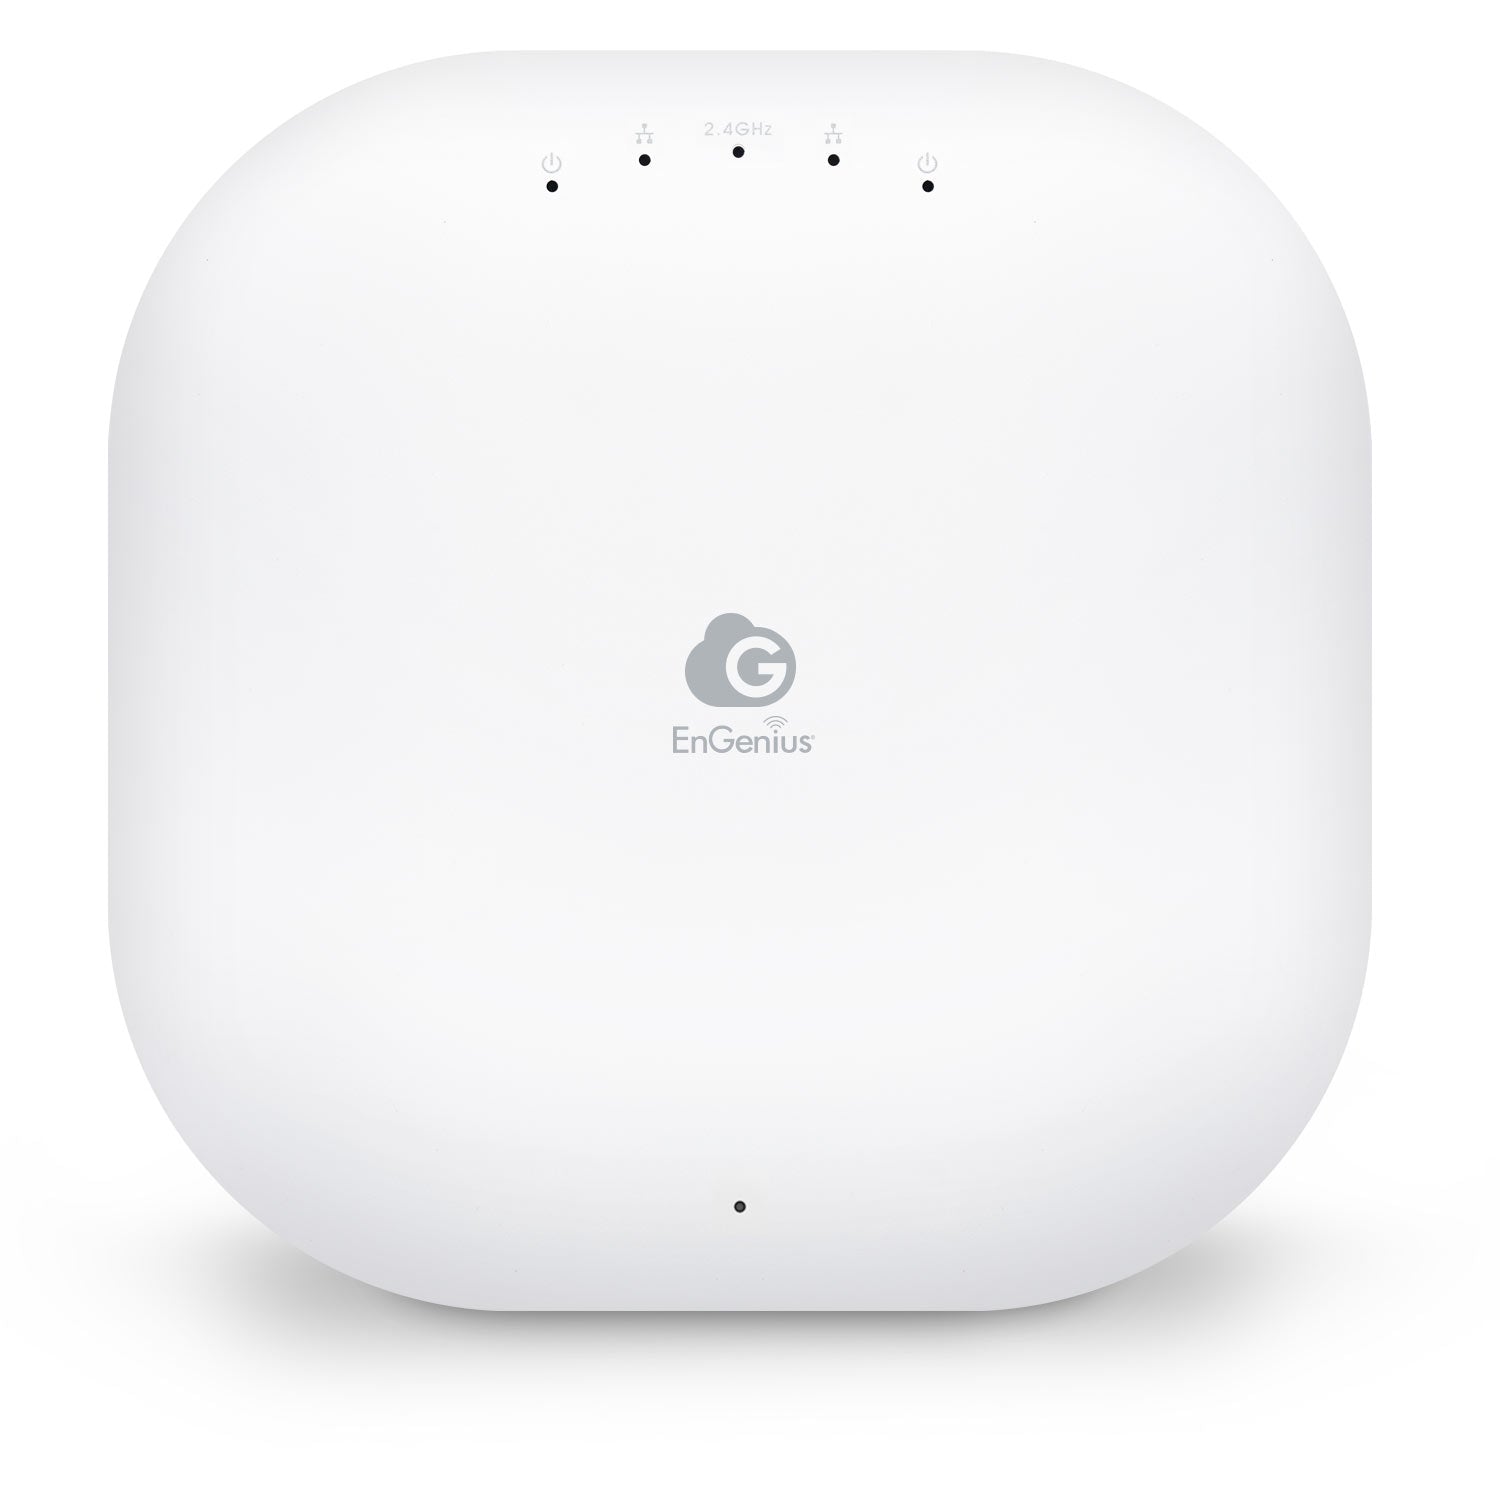 ECW120: Cloud Managed 11ac Wave 2 Indoor Wireless Access Point